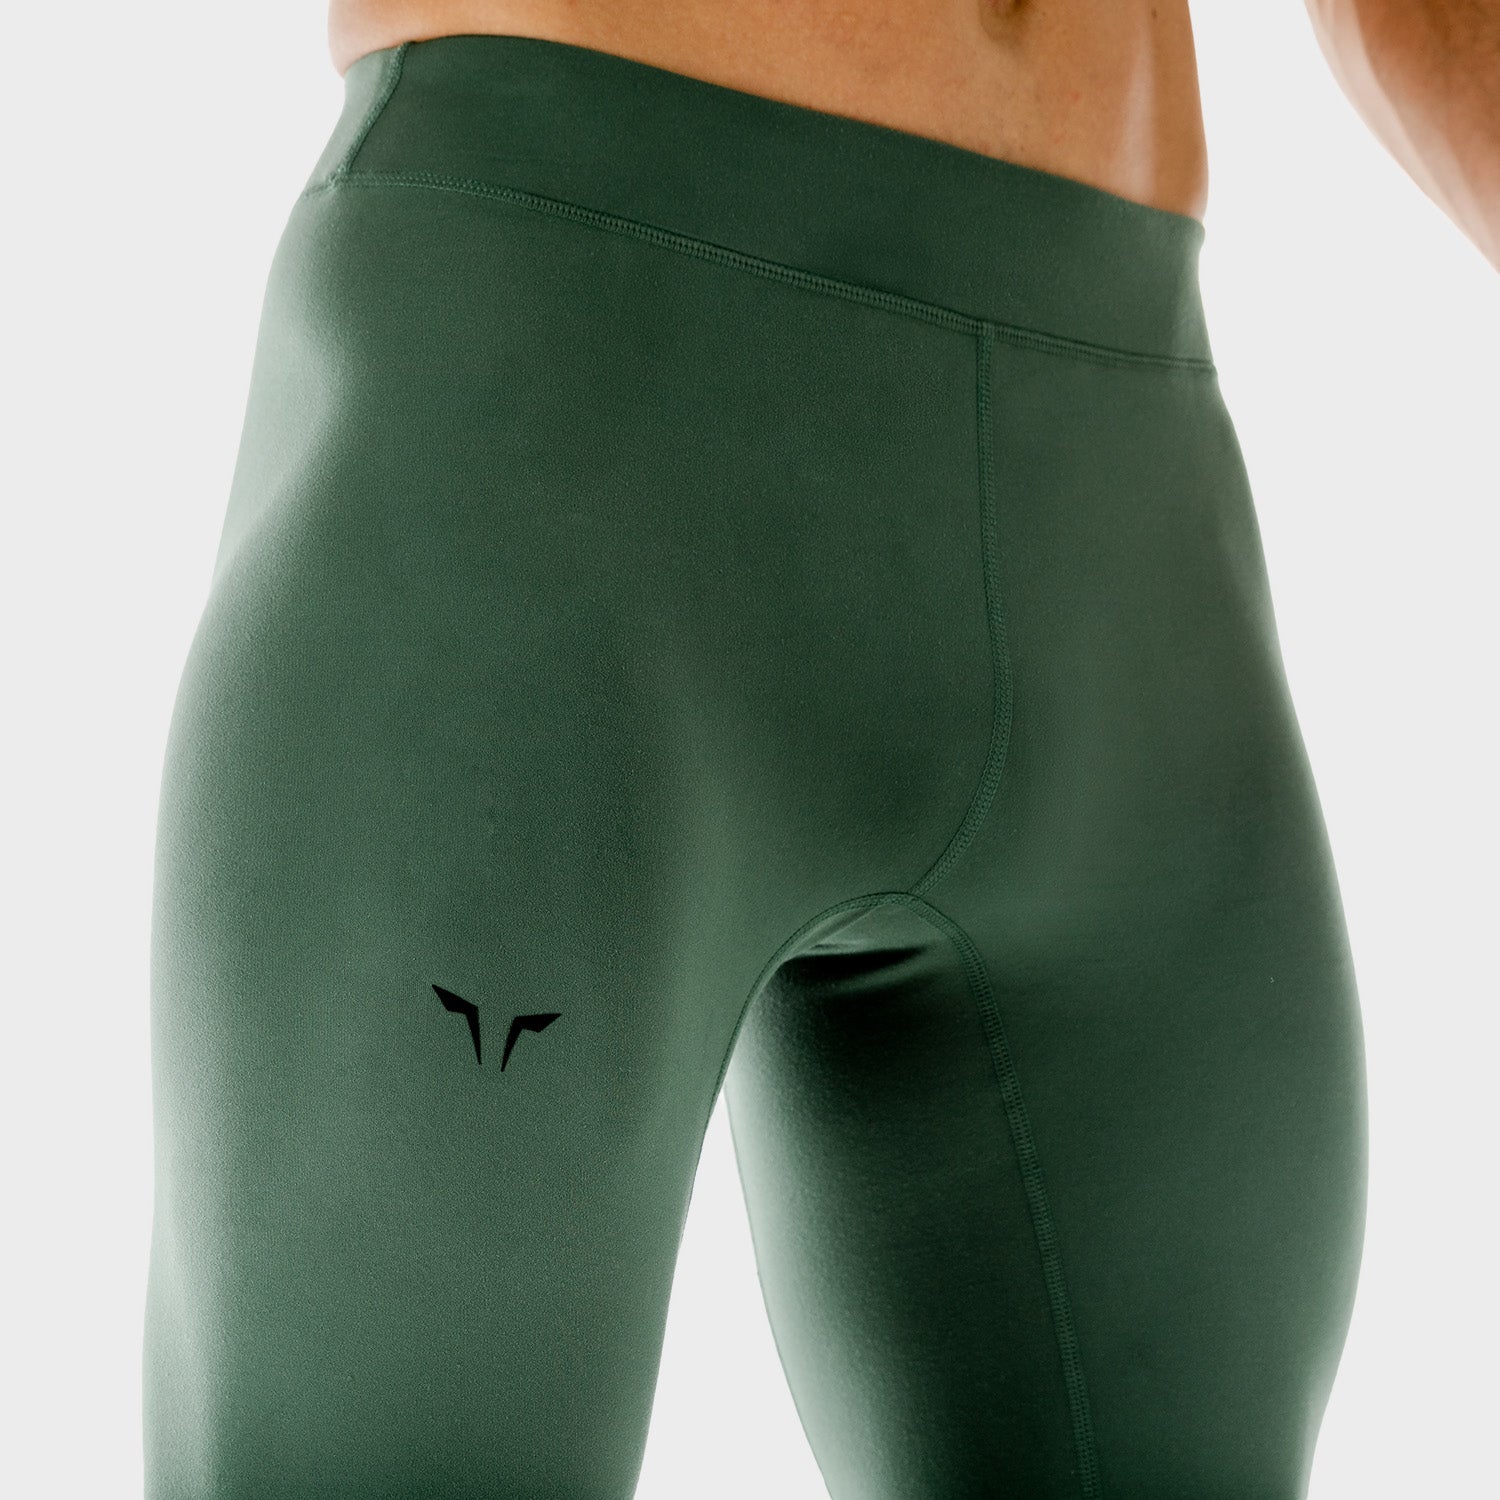 squatwolf-gym-leggings-for-men-360-performance-tights-garden-topiary-workout-clothes